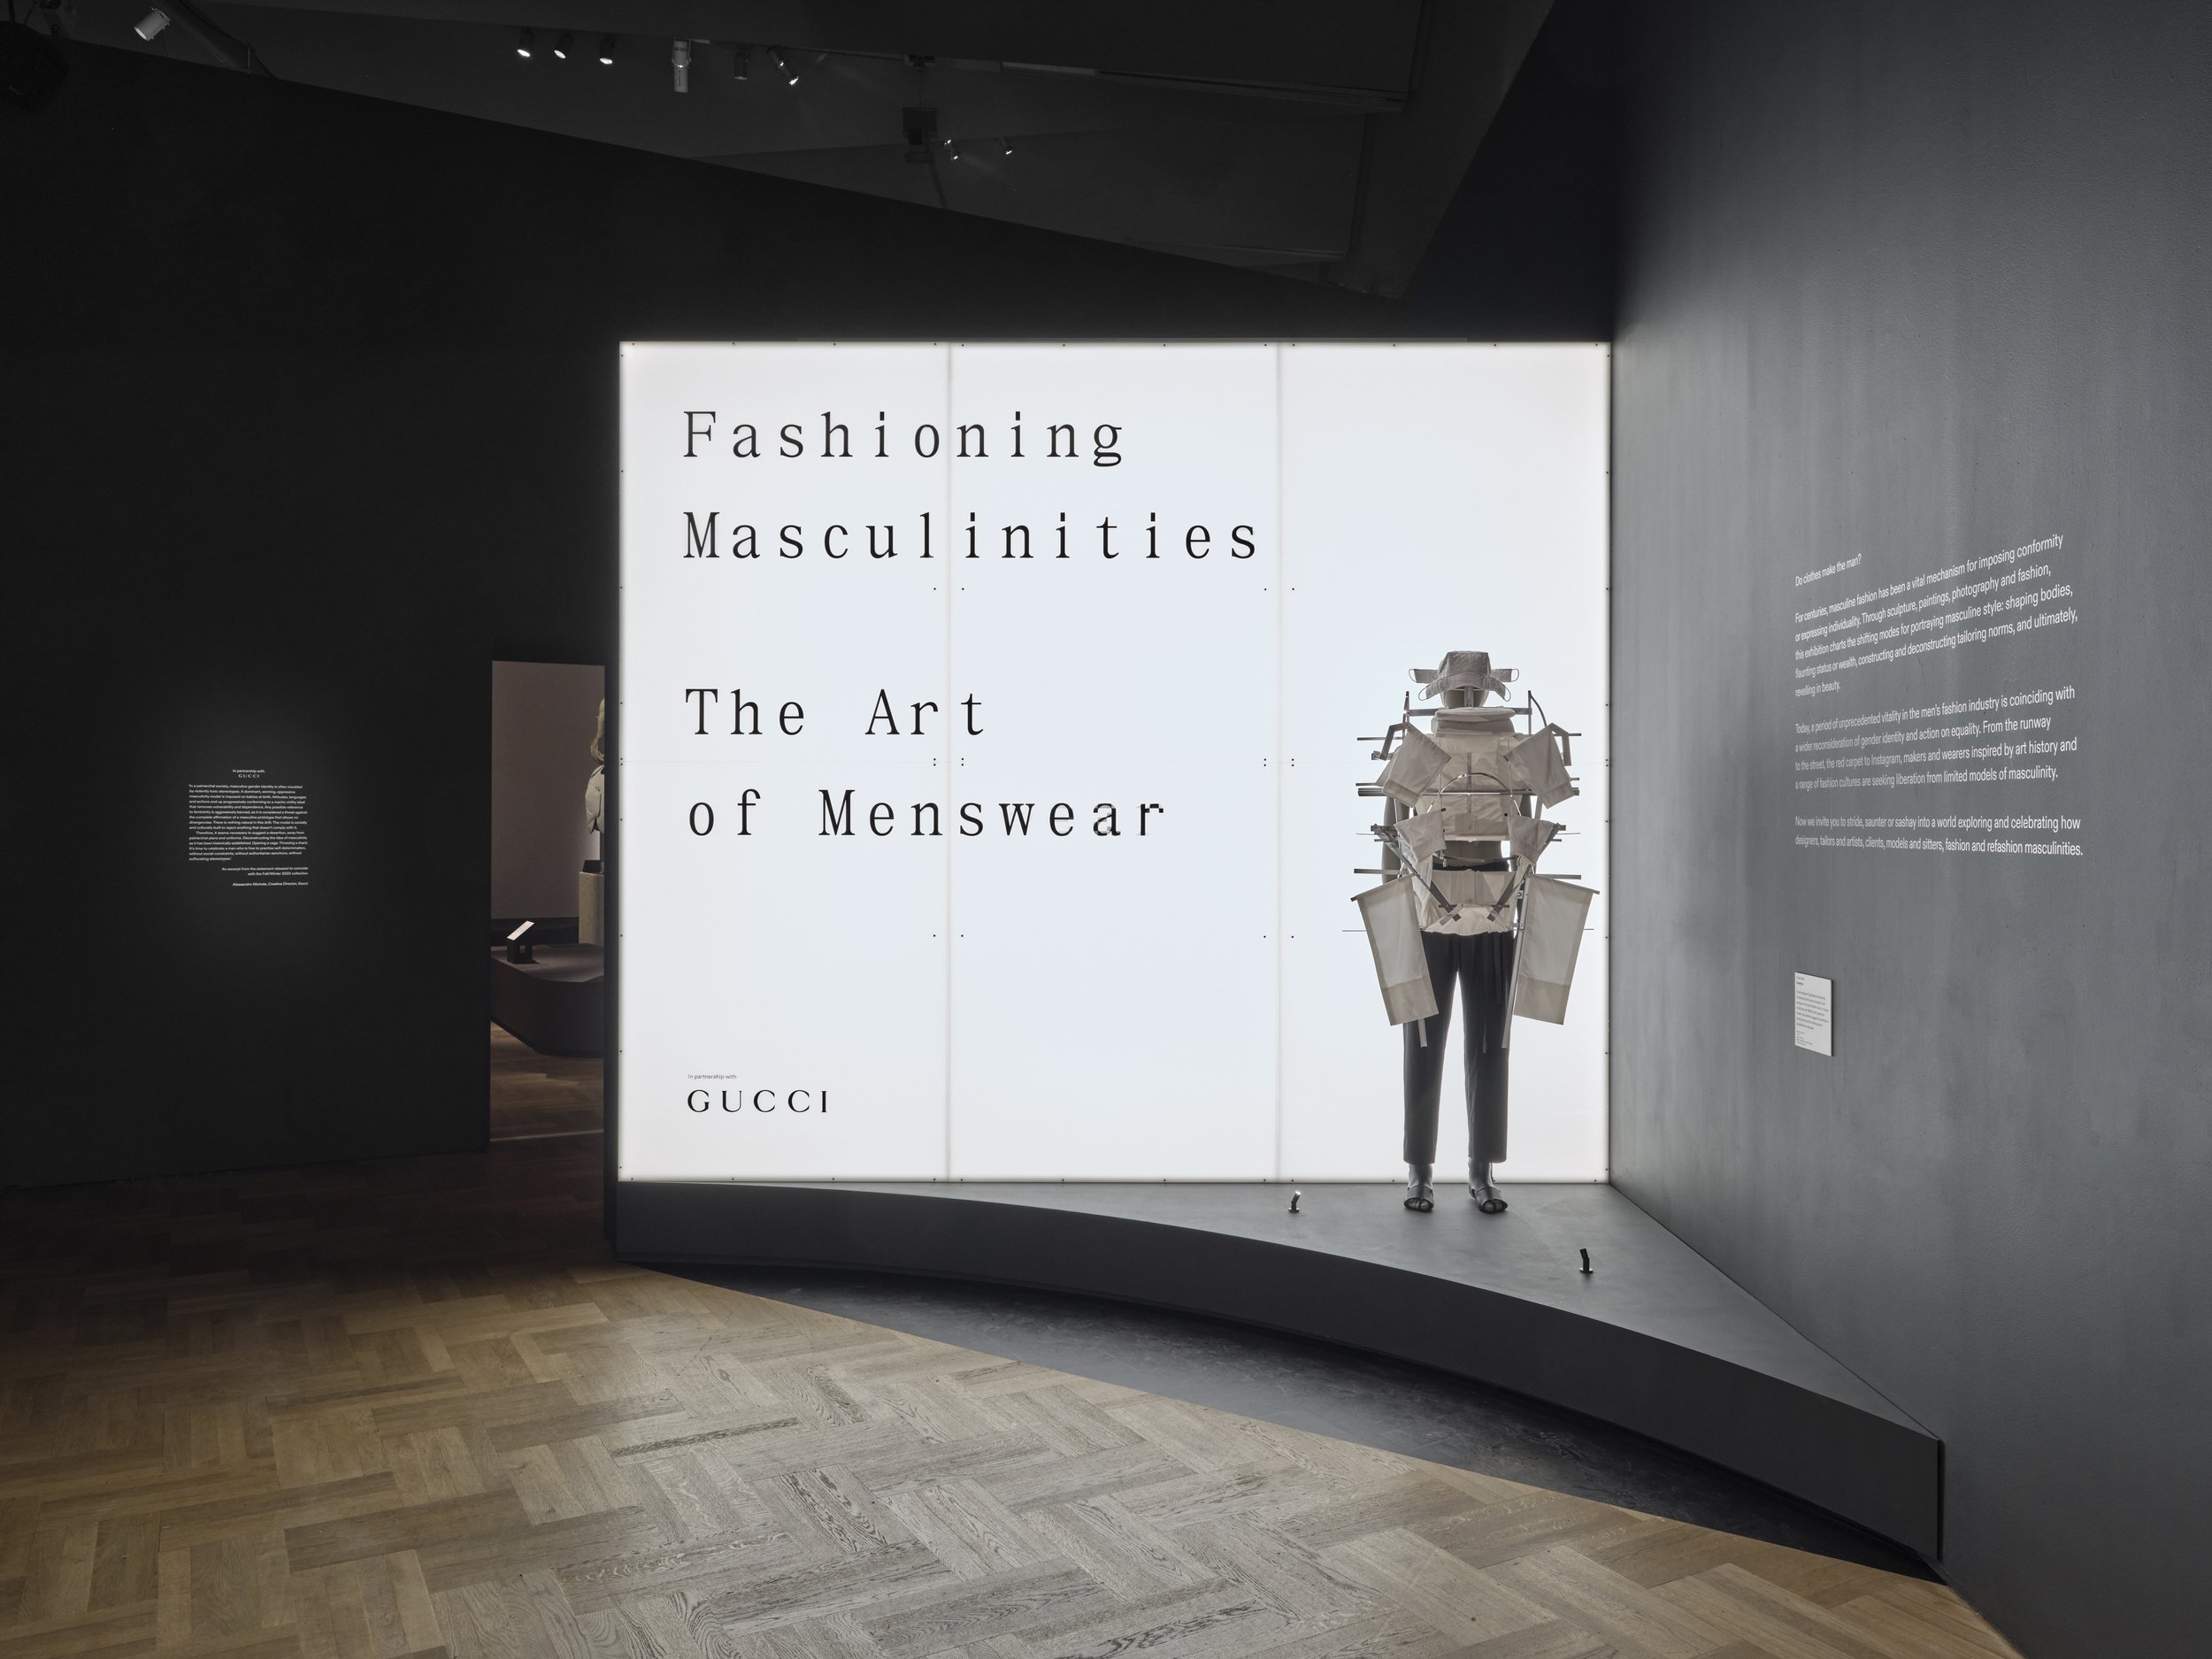 The V&A's “Fashioning Masculinities” Explores the History of